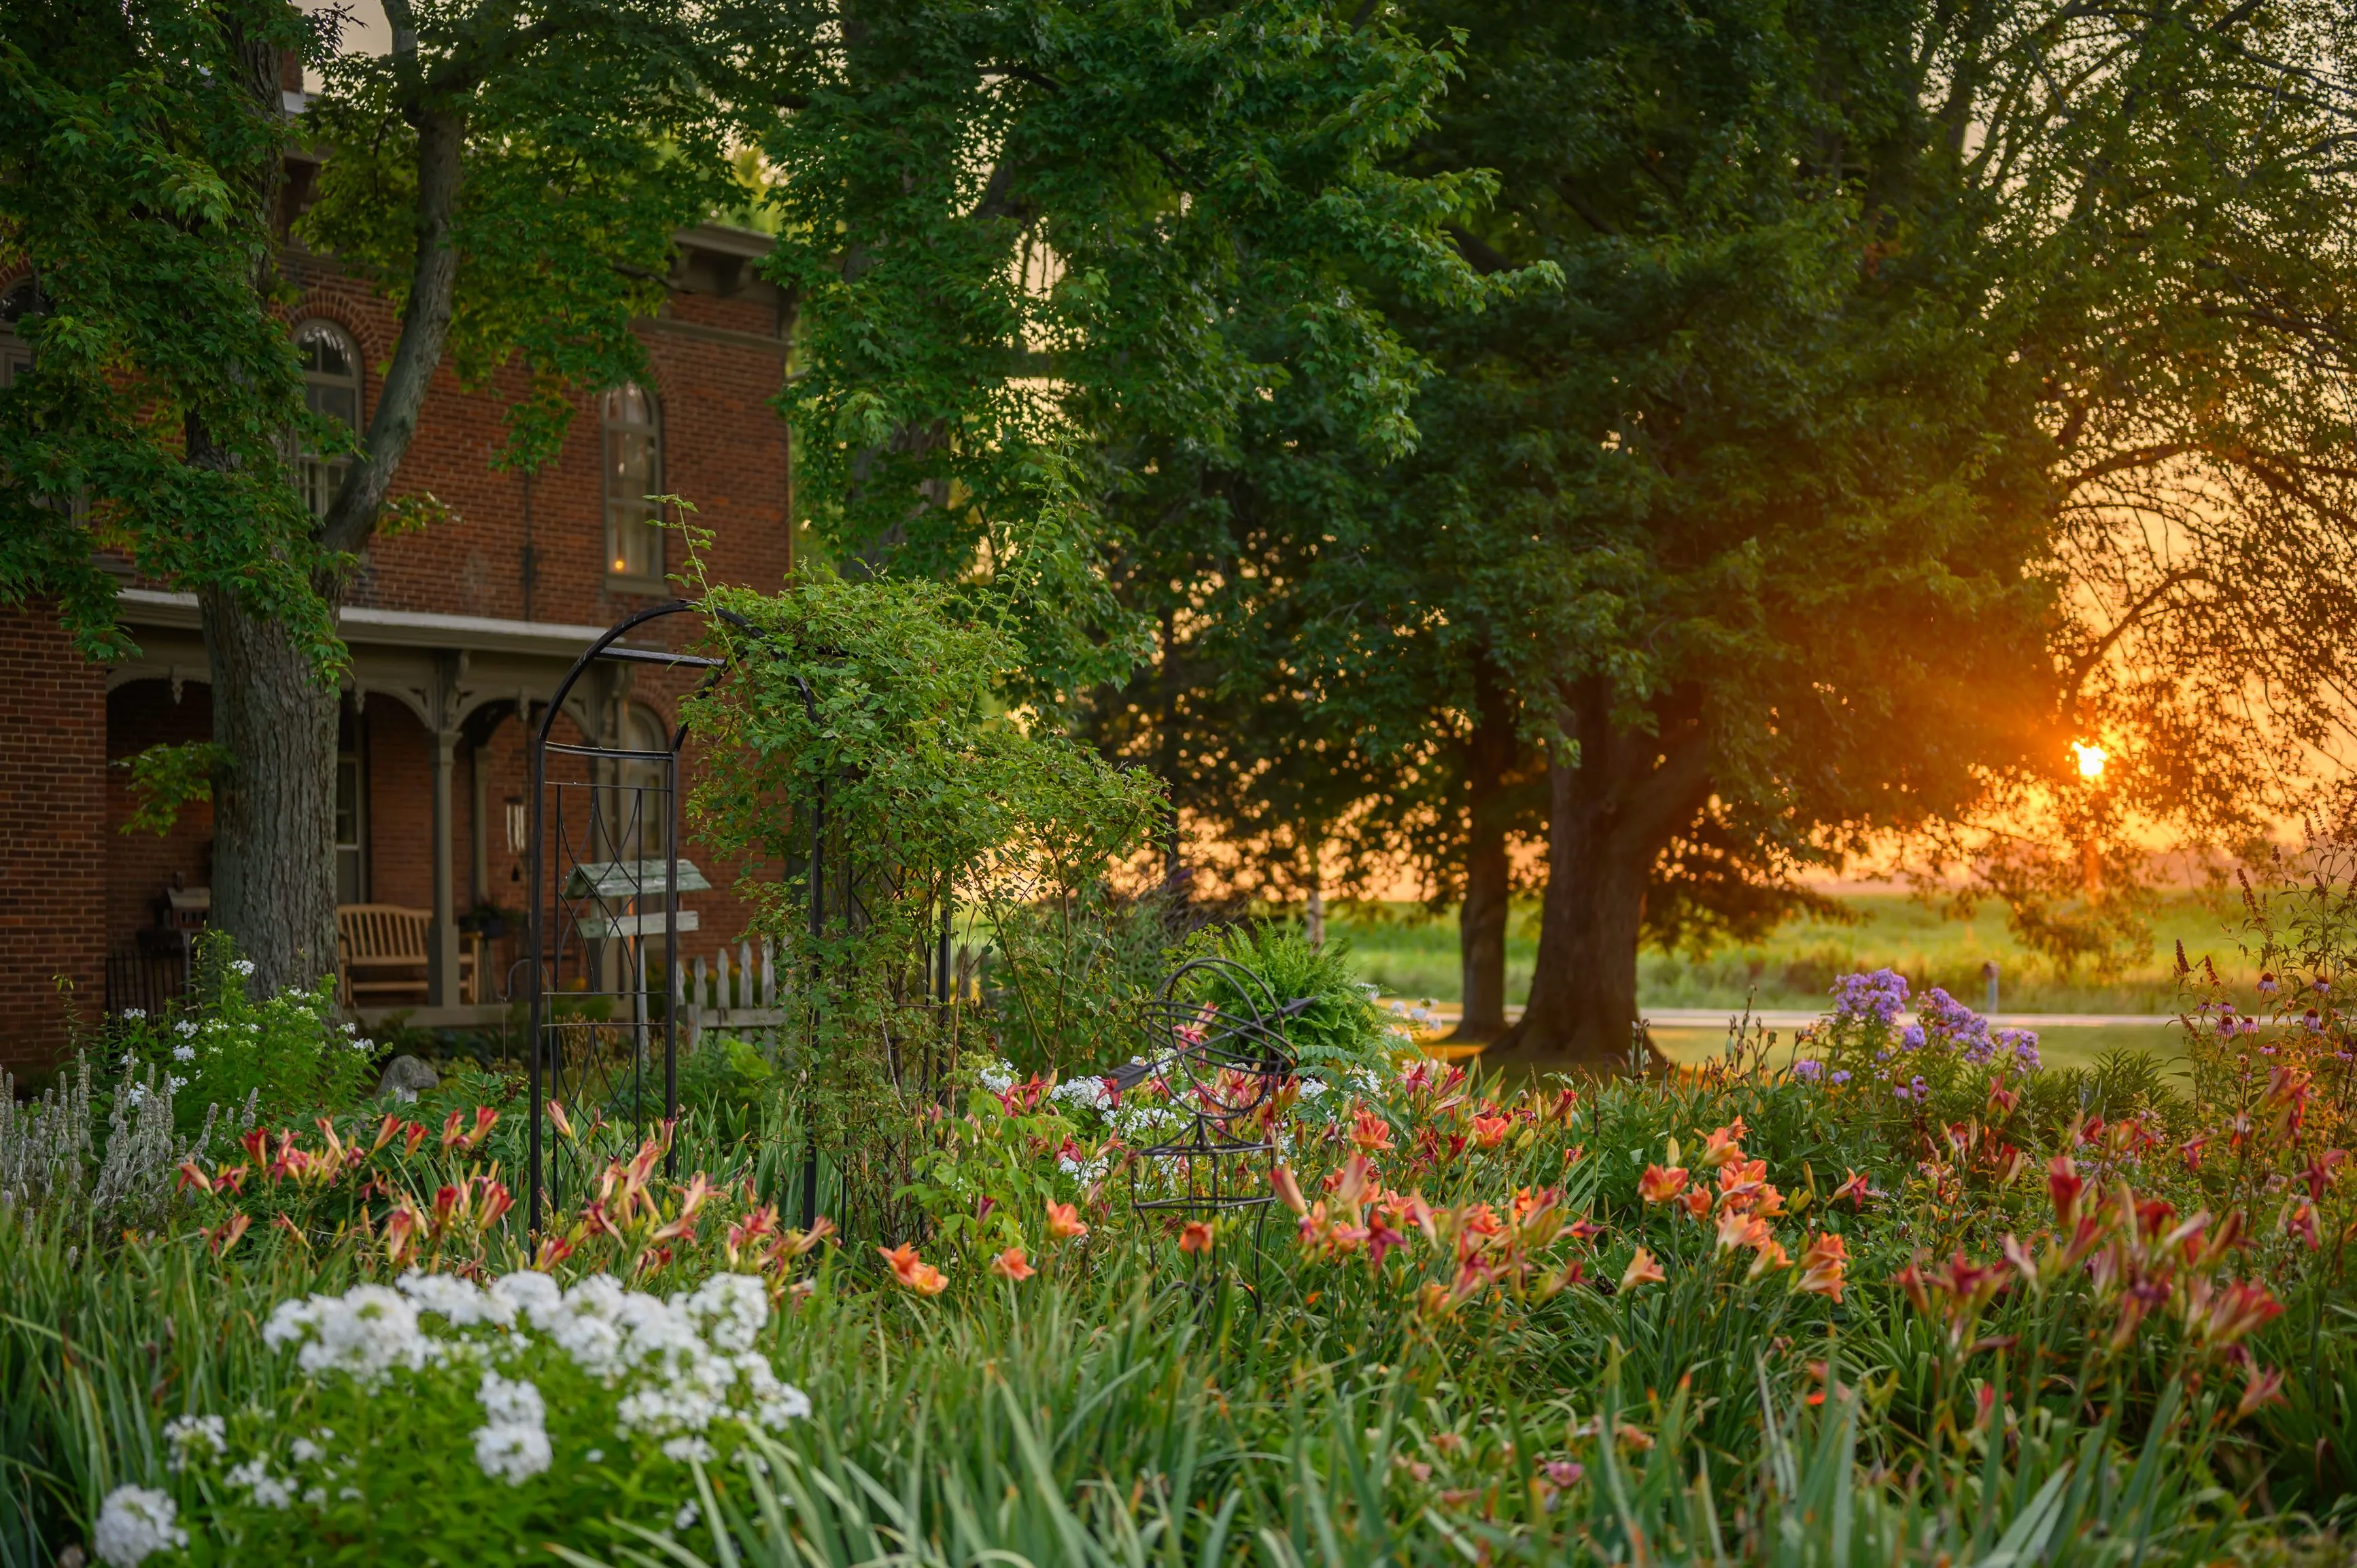 Idyllic brick country house with porch, surrounded by lush garden and trees, bathed in warm sunlight at sunset.